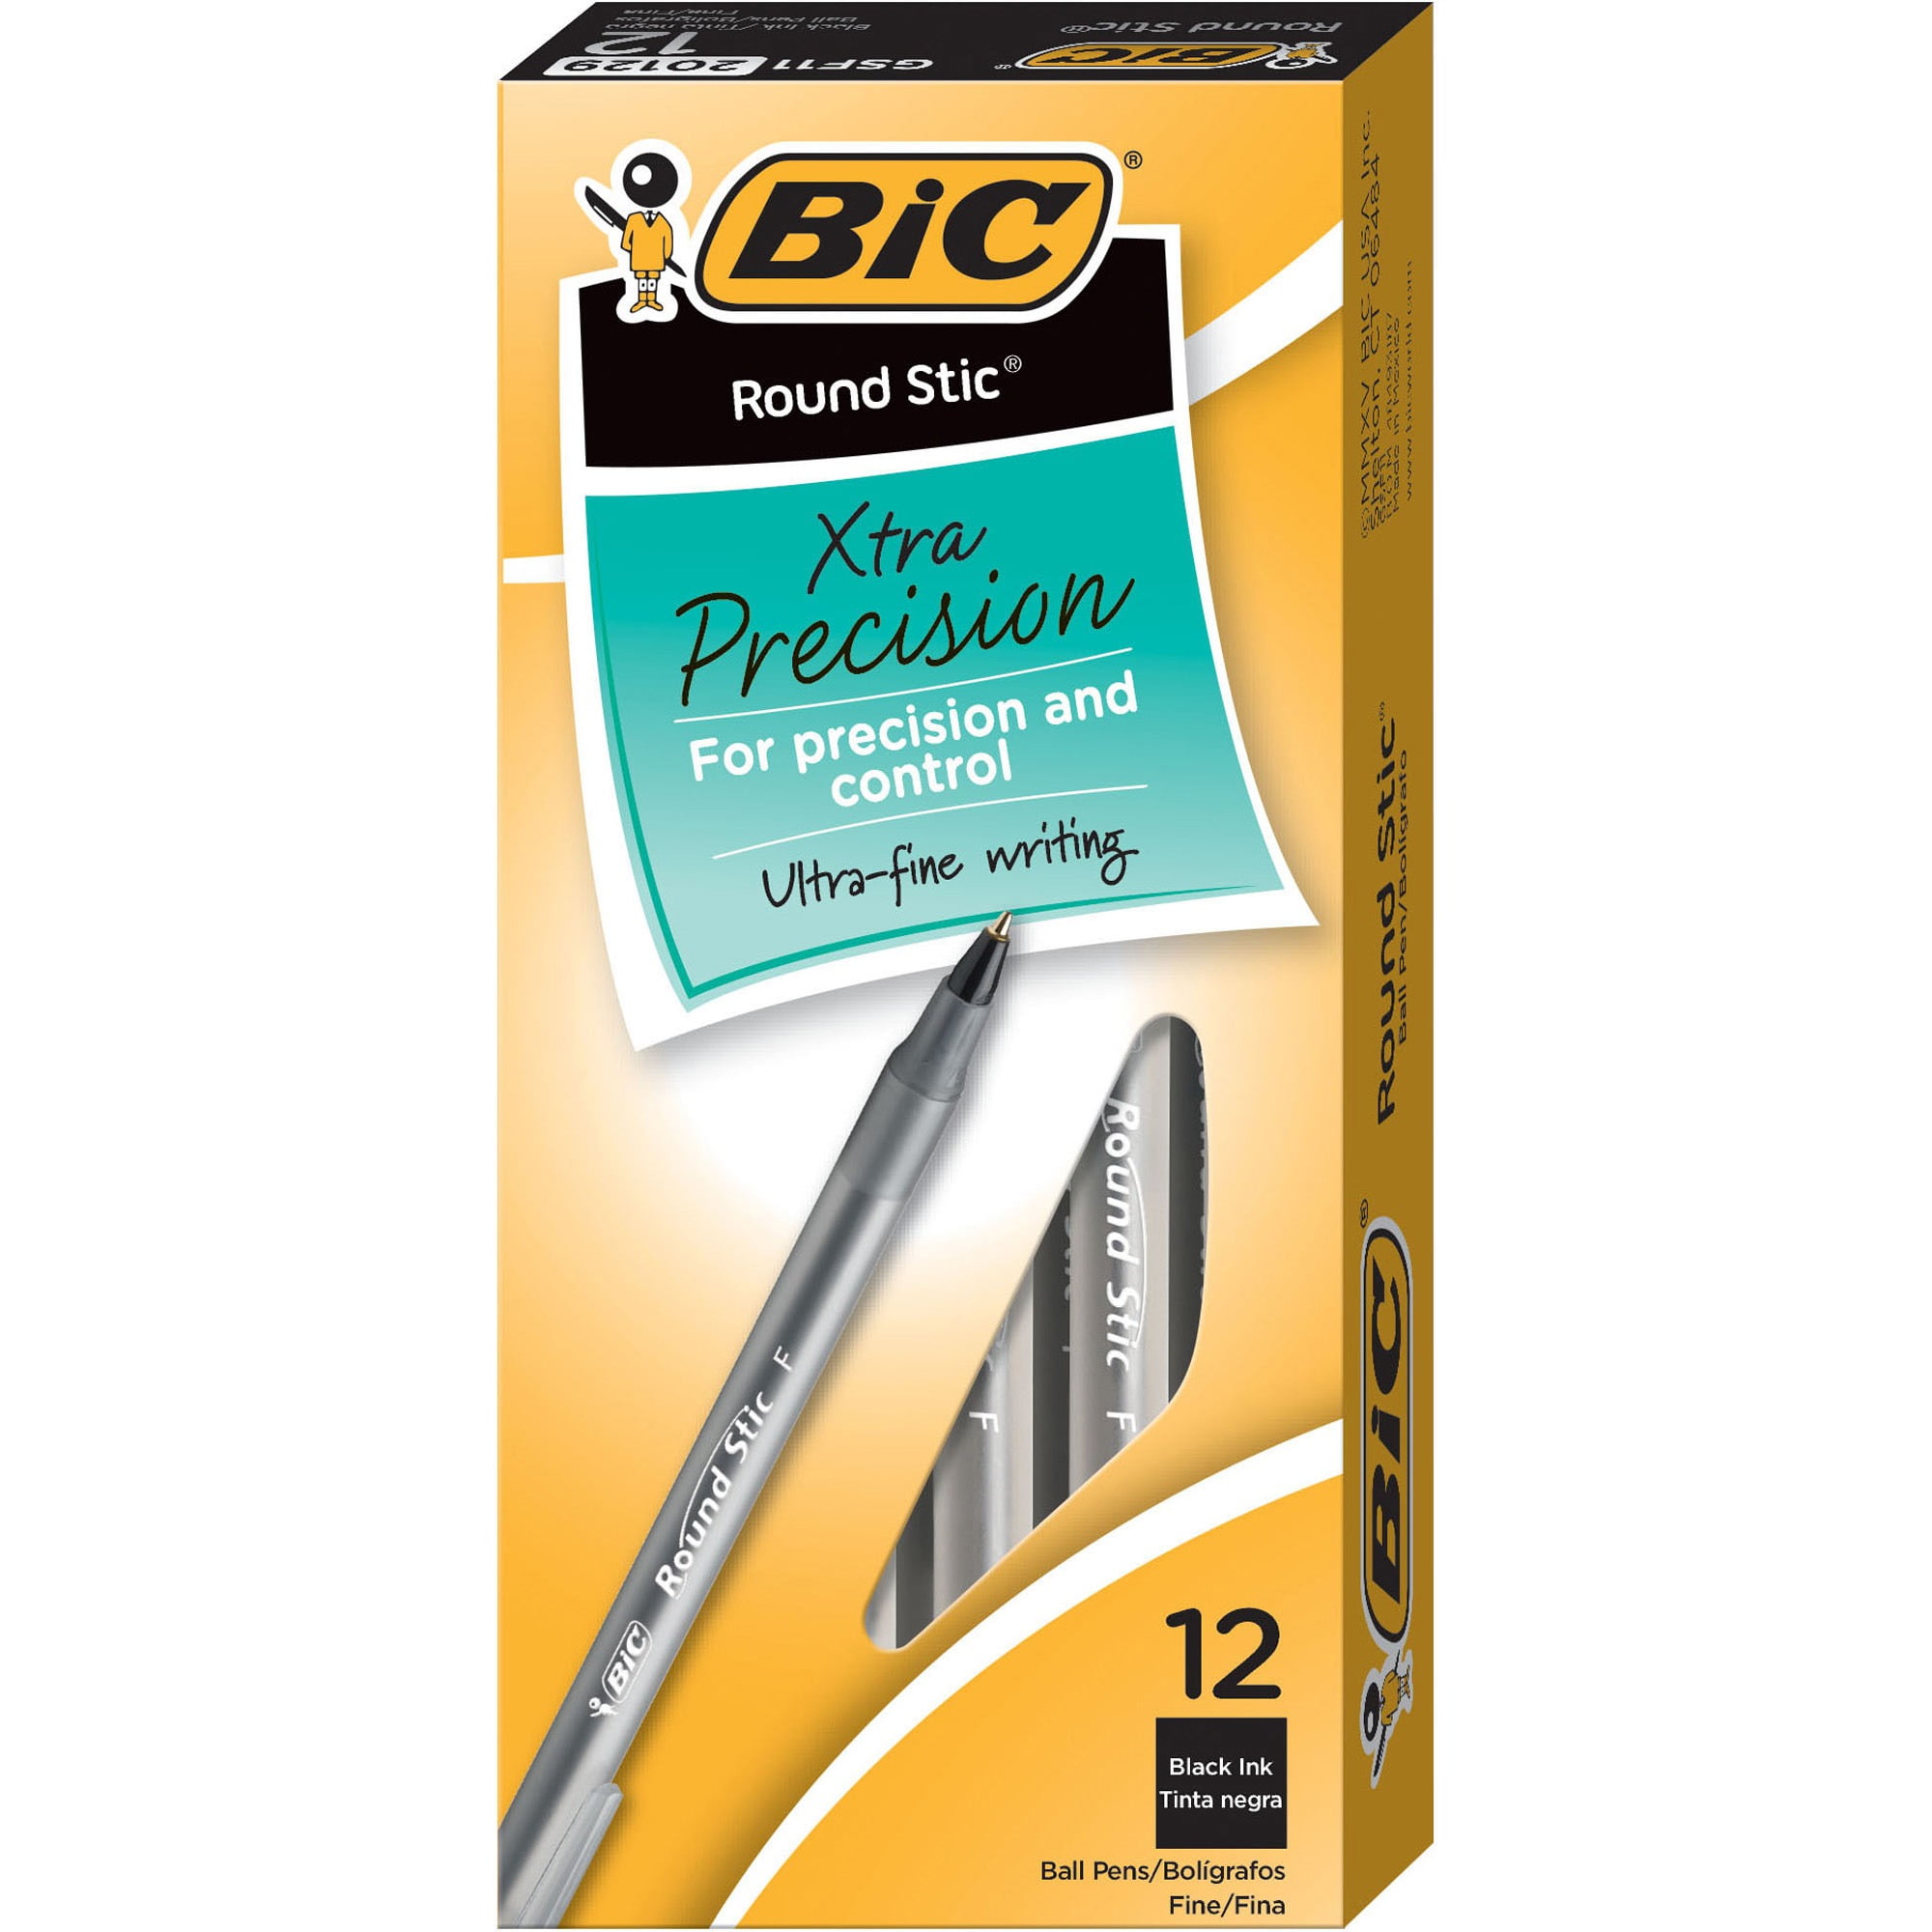 BIC Round Stic Xtra Precision Ballpoint Pen Pack, Medium 1 mm, Assorted Ink  Barrel Colors, 60/Bundle of 5 Packs